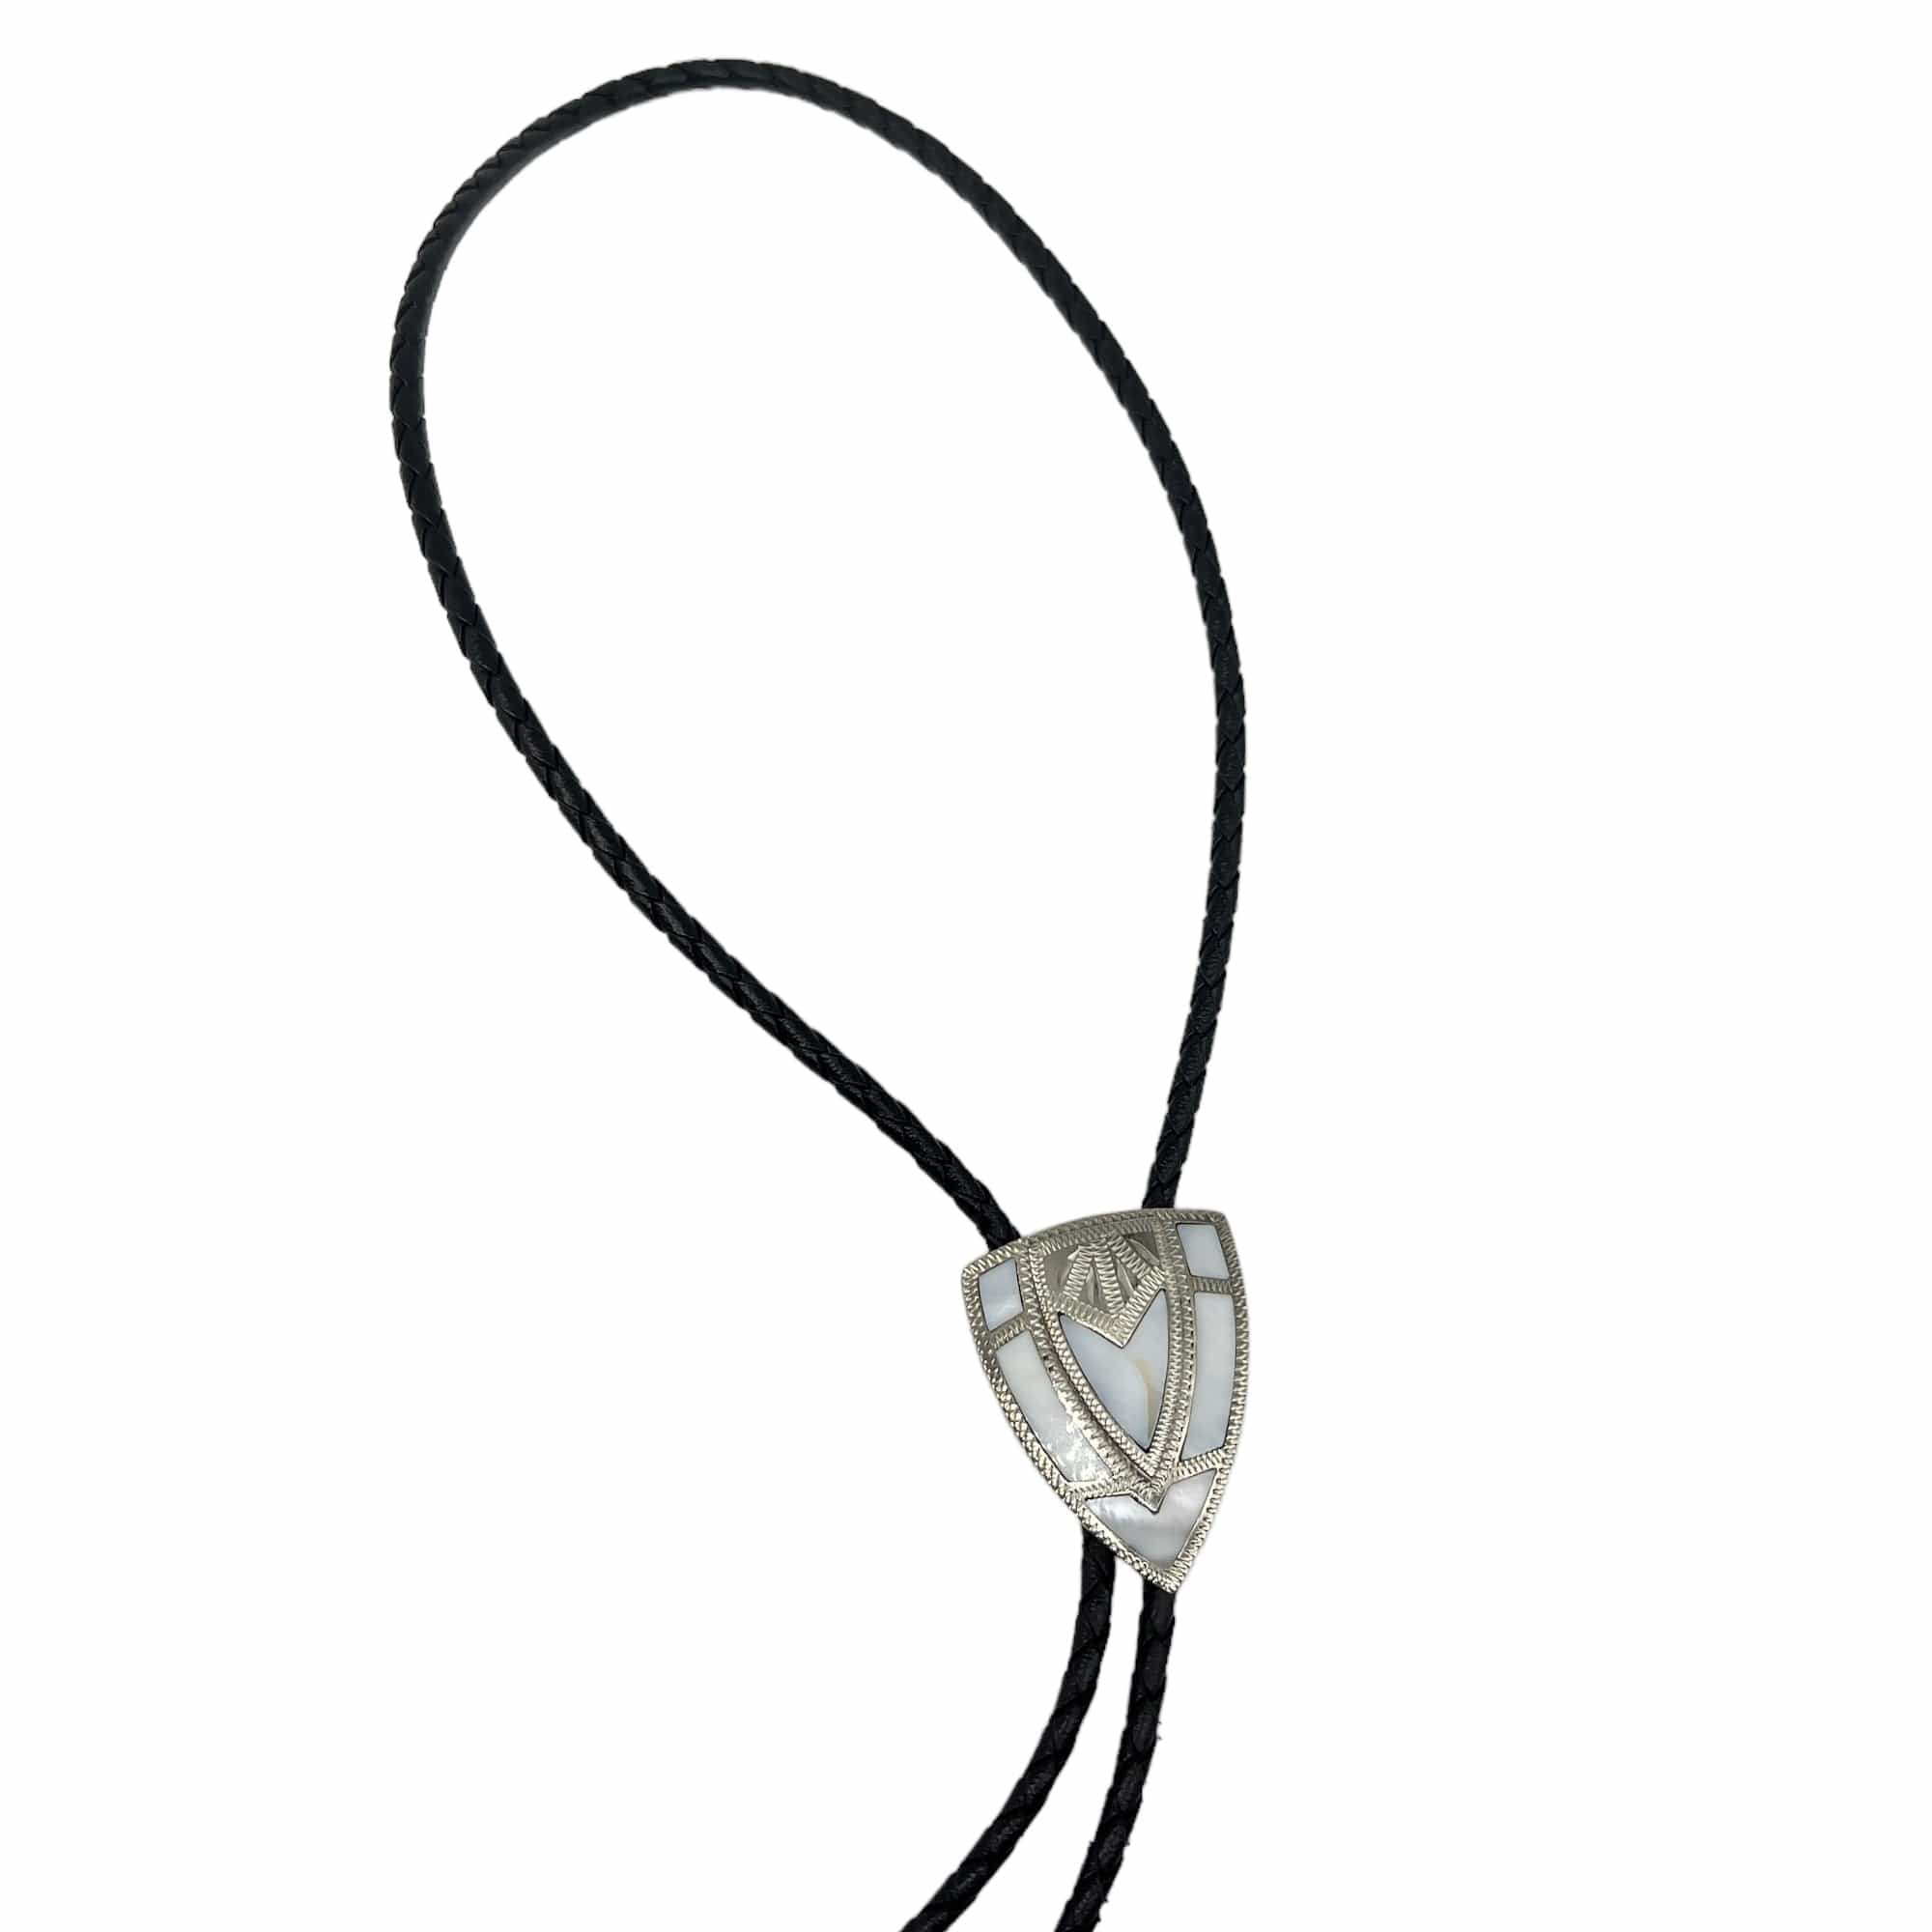 JH Vintage Unisex Mother of Pearl Shield Bolo Tie - Silver